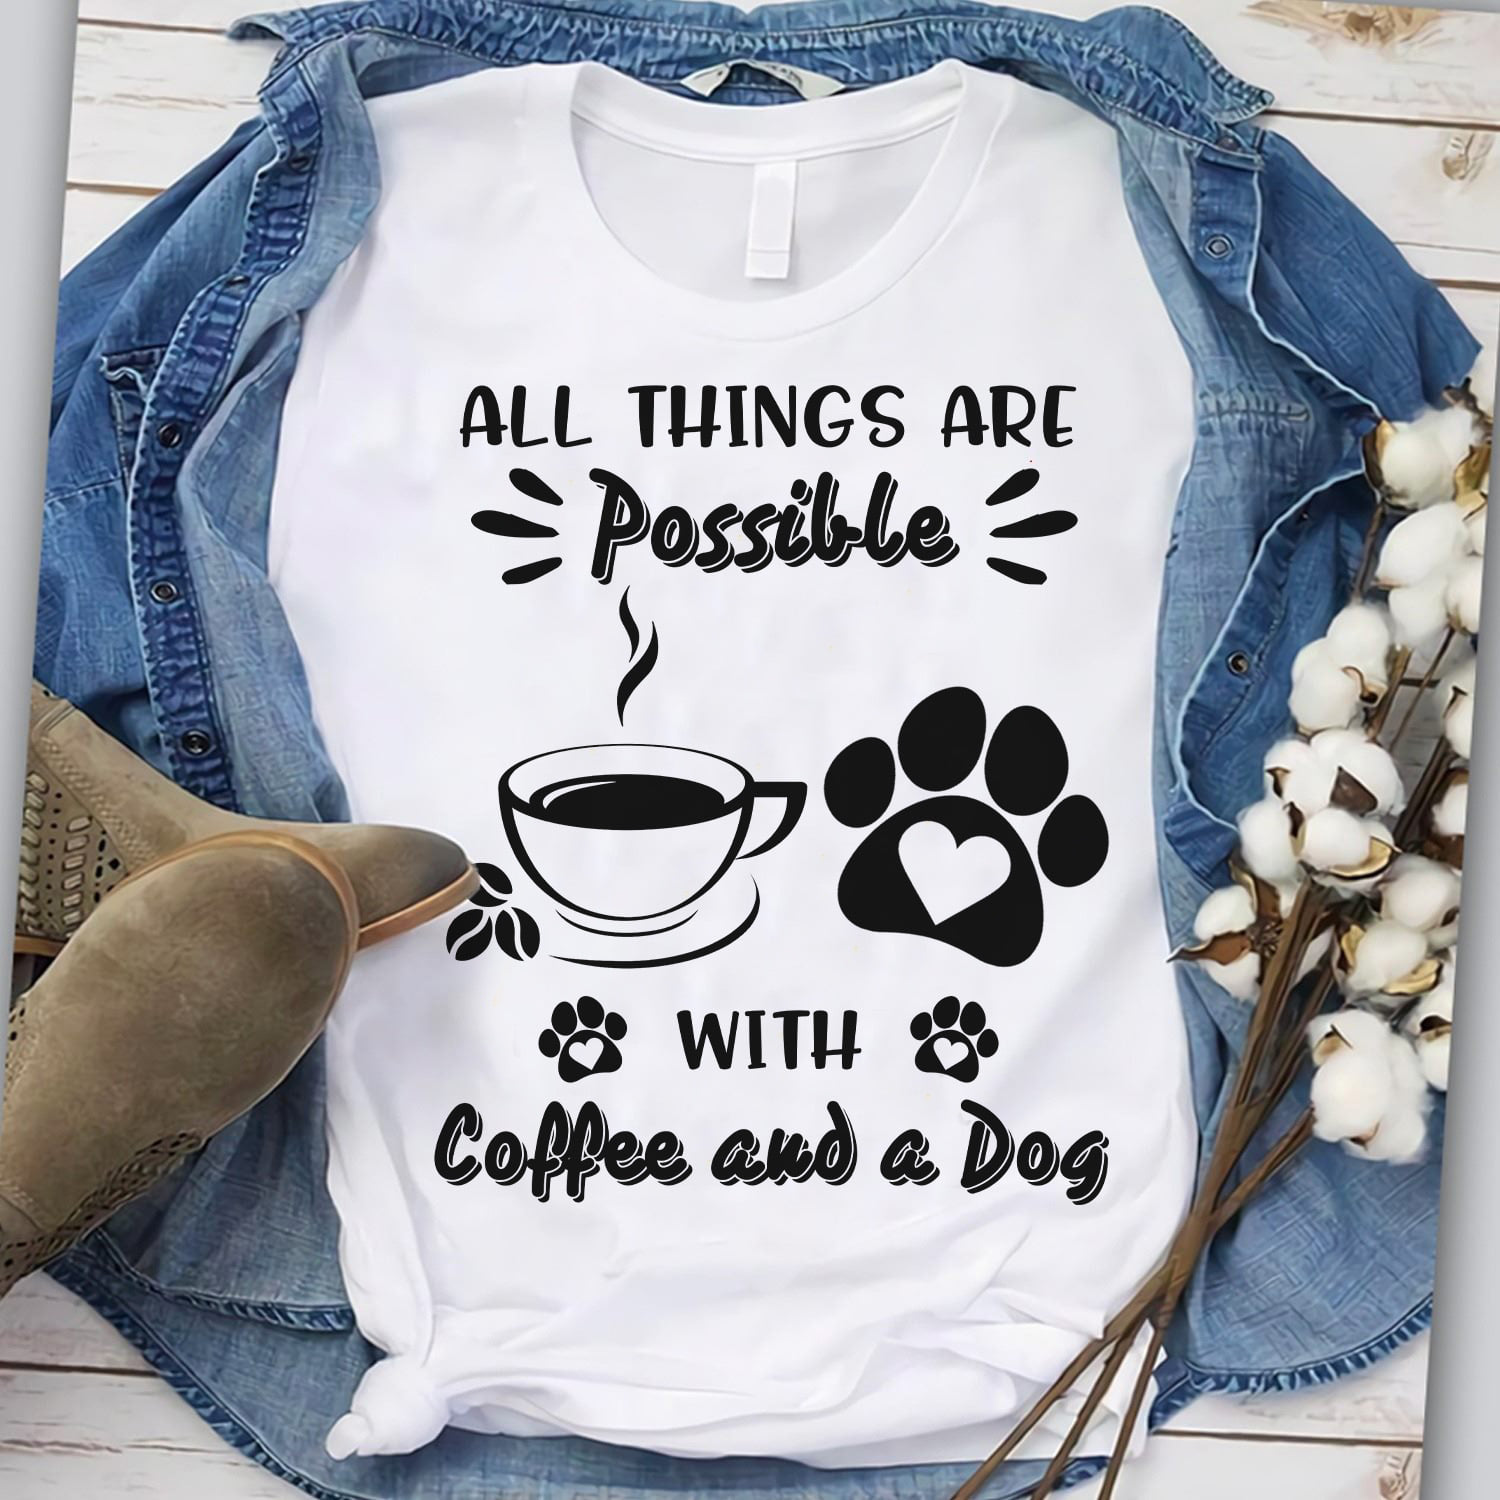 All things are possible with coffe and a dog